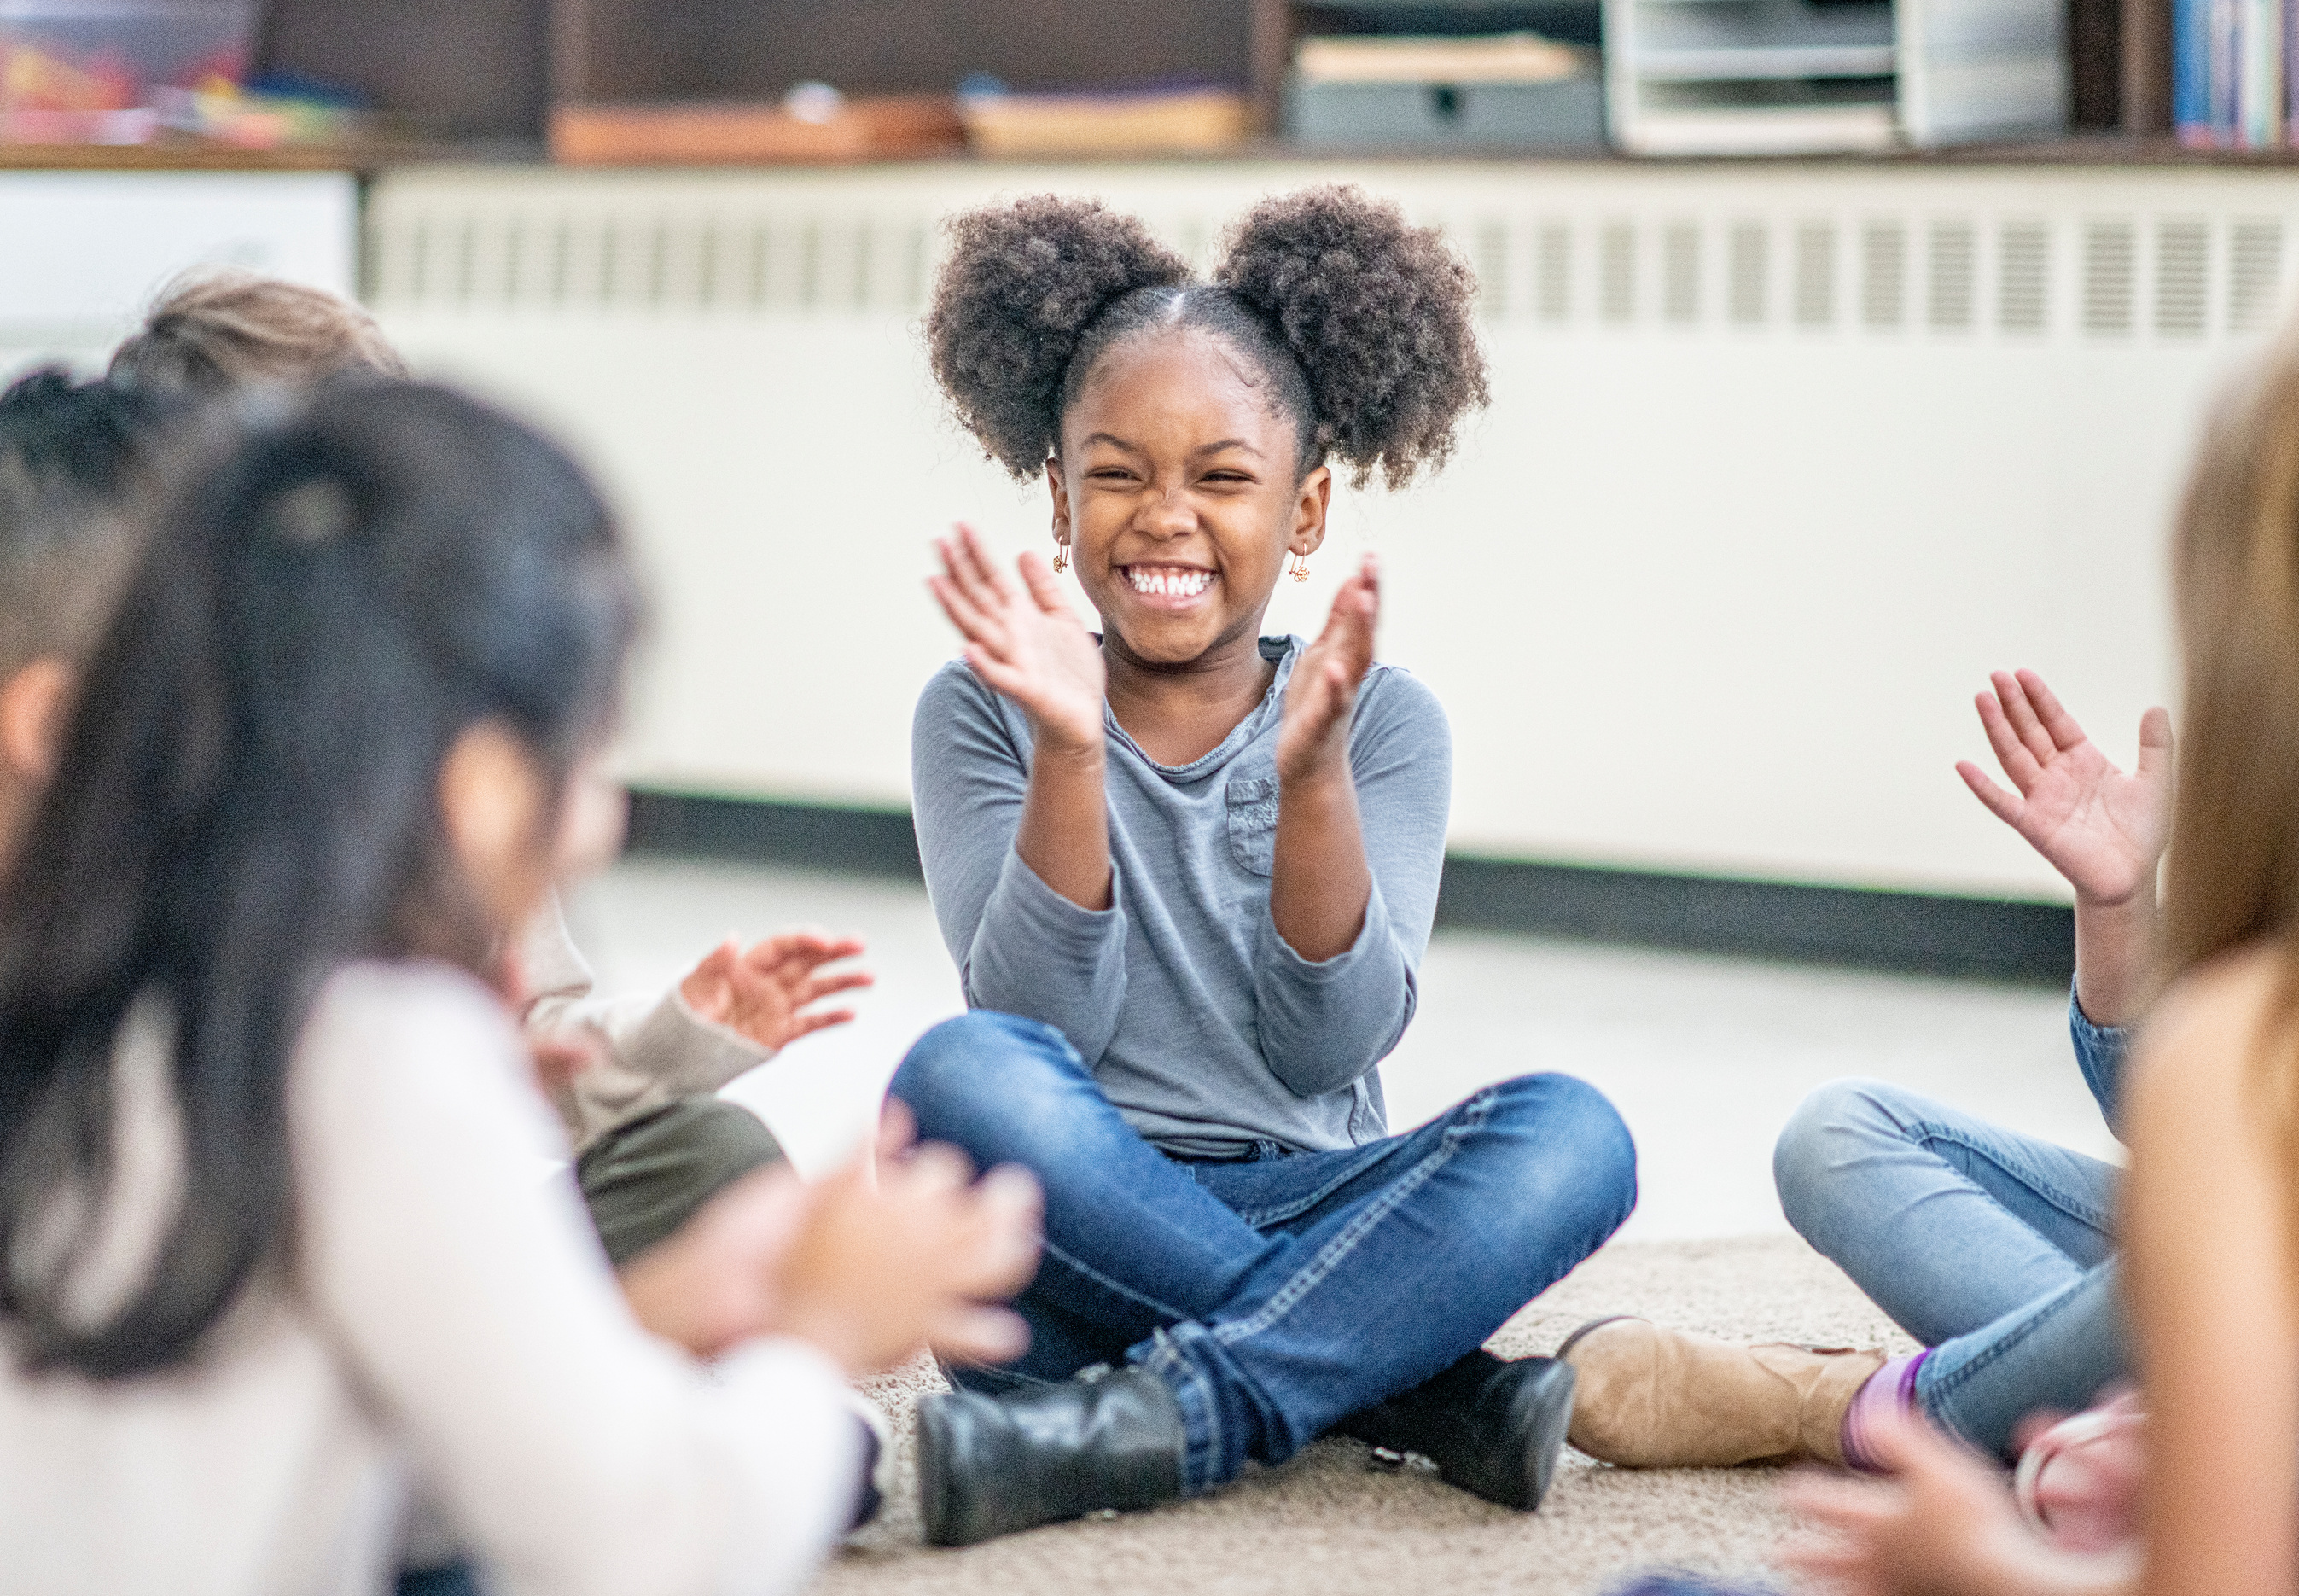 Diverse kids in a classroom